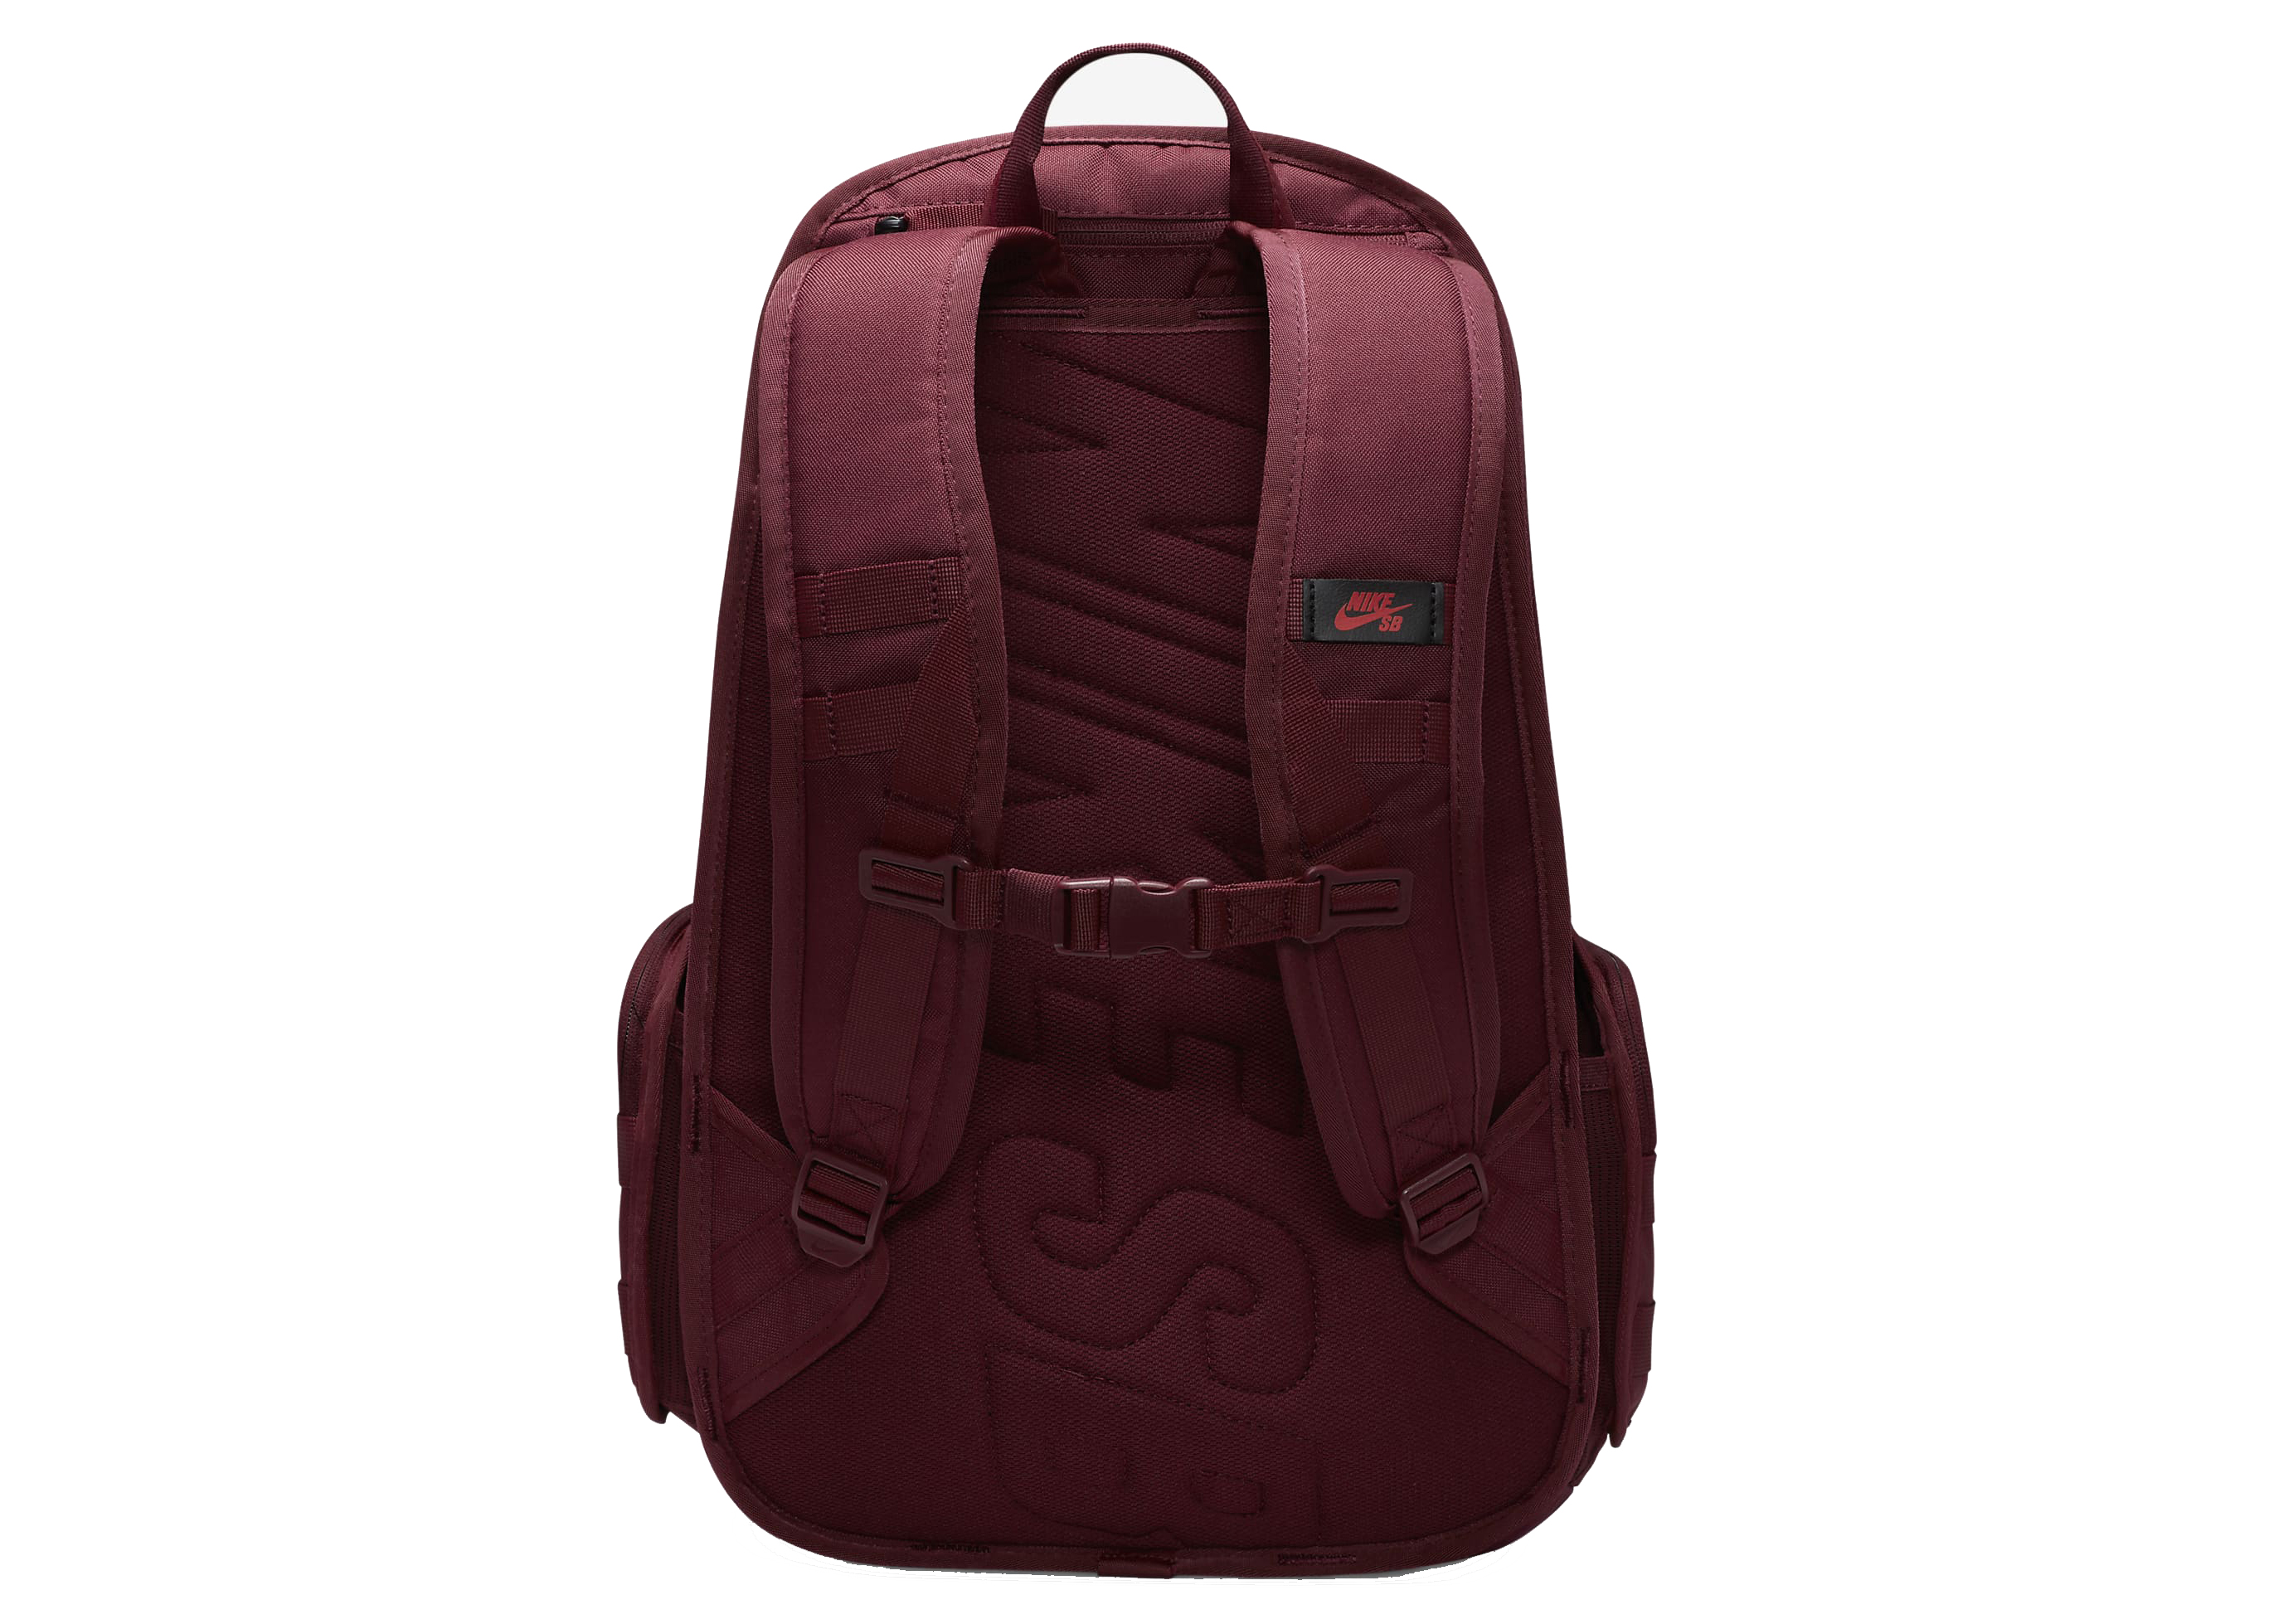 Nike Skateboarding Nike SB Courthouse Backpack, Cheap price, luggage Bags,  backpack png | PNGEgg